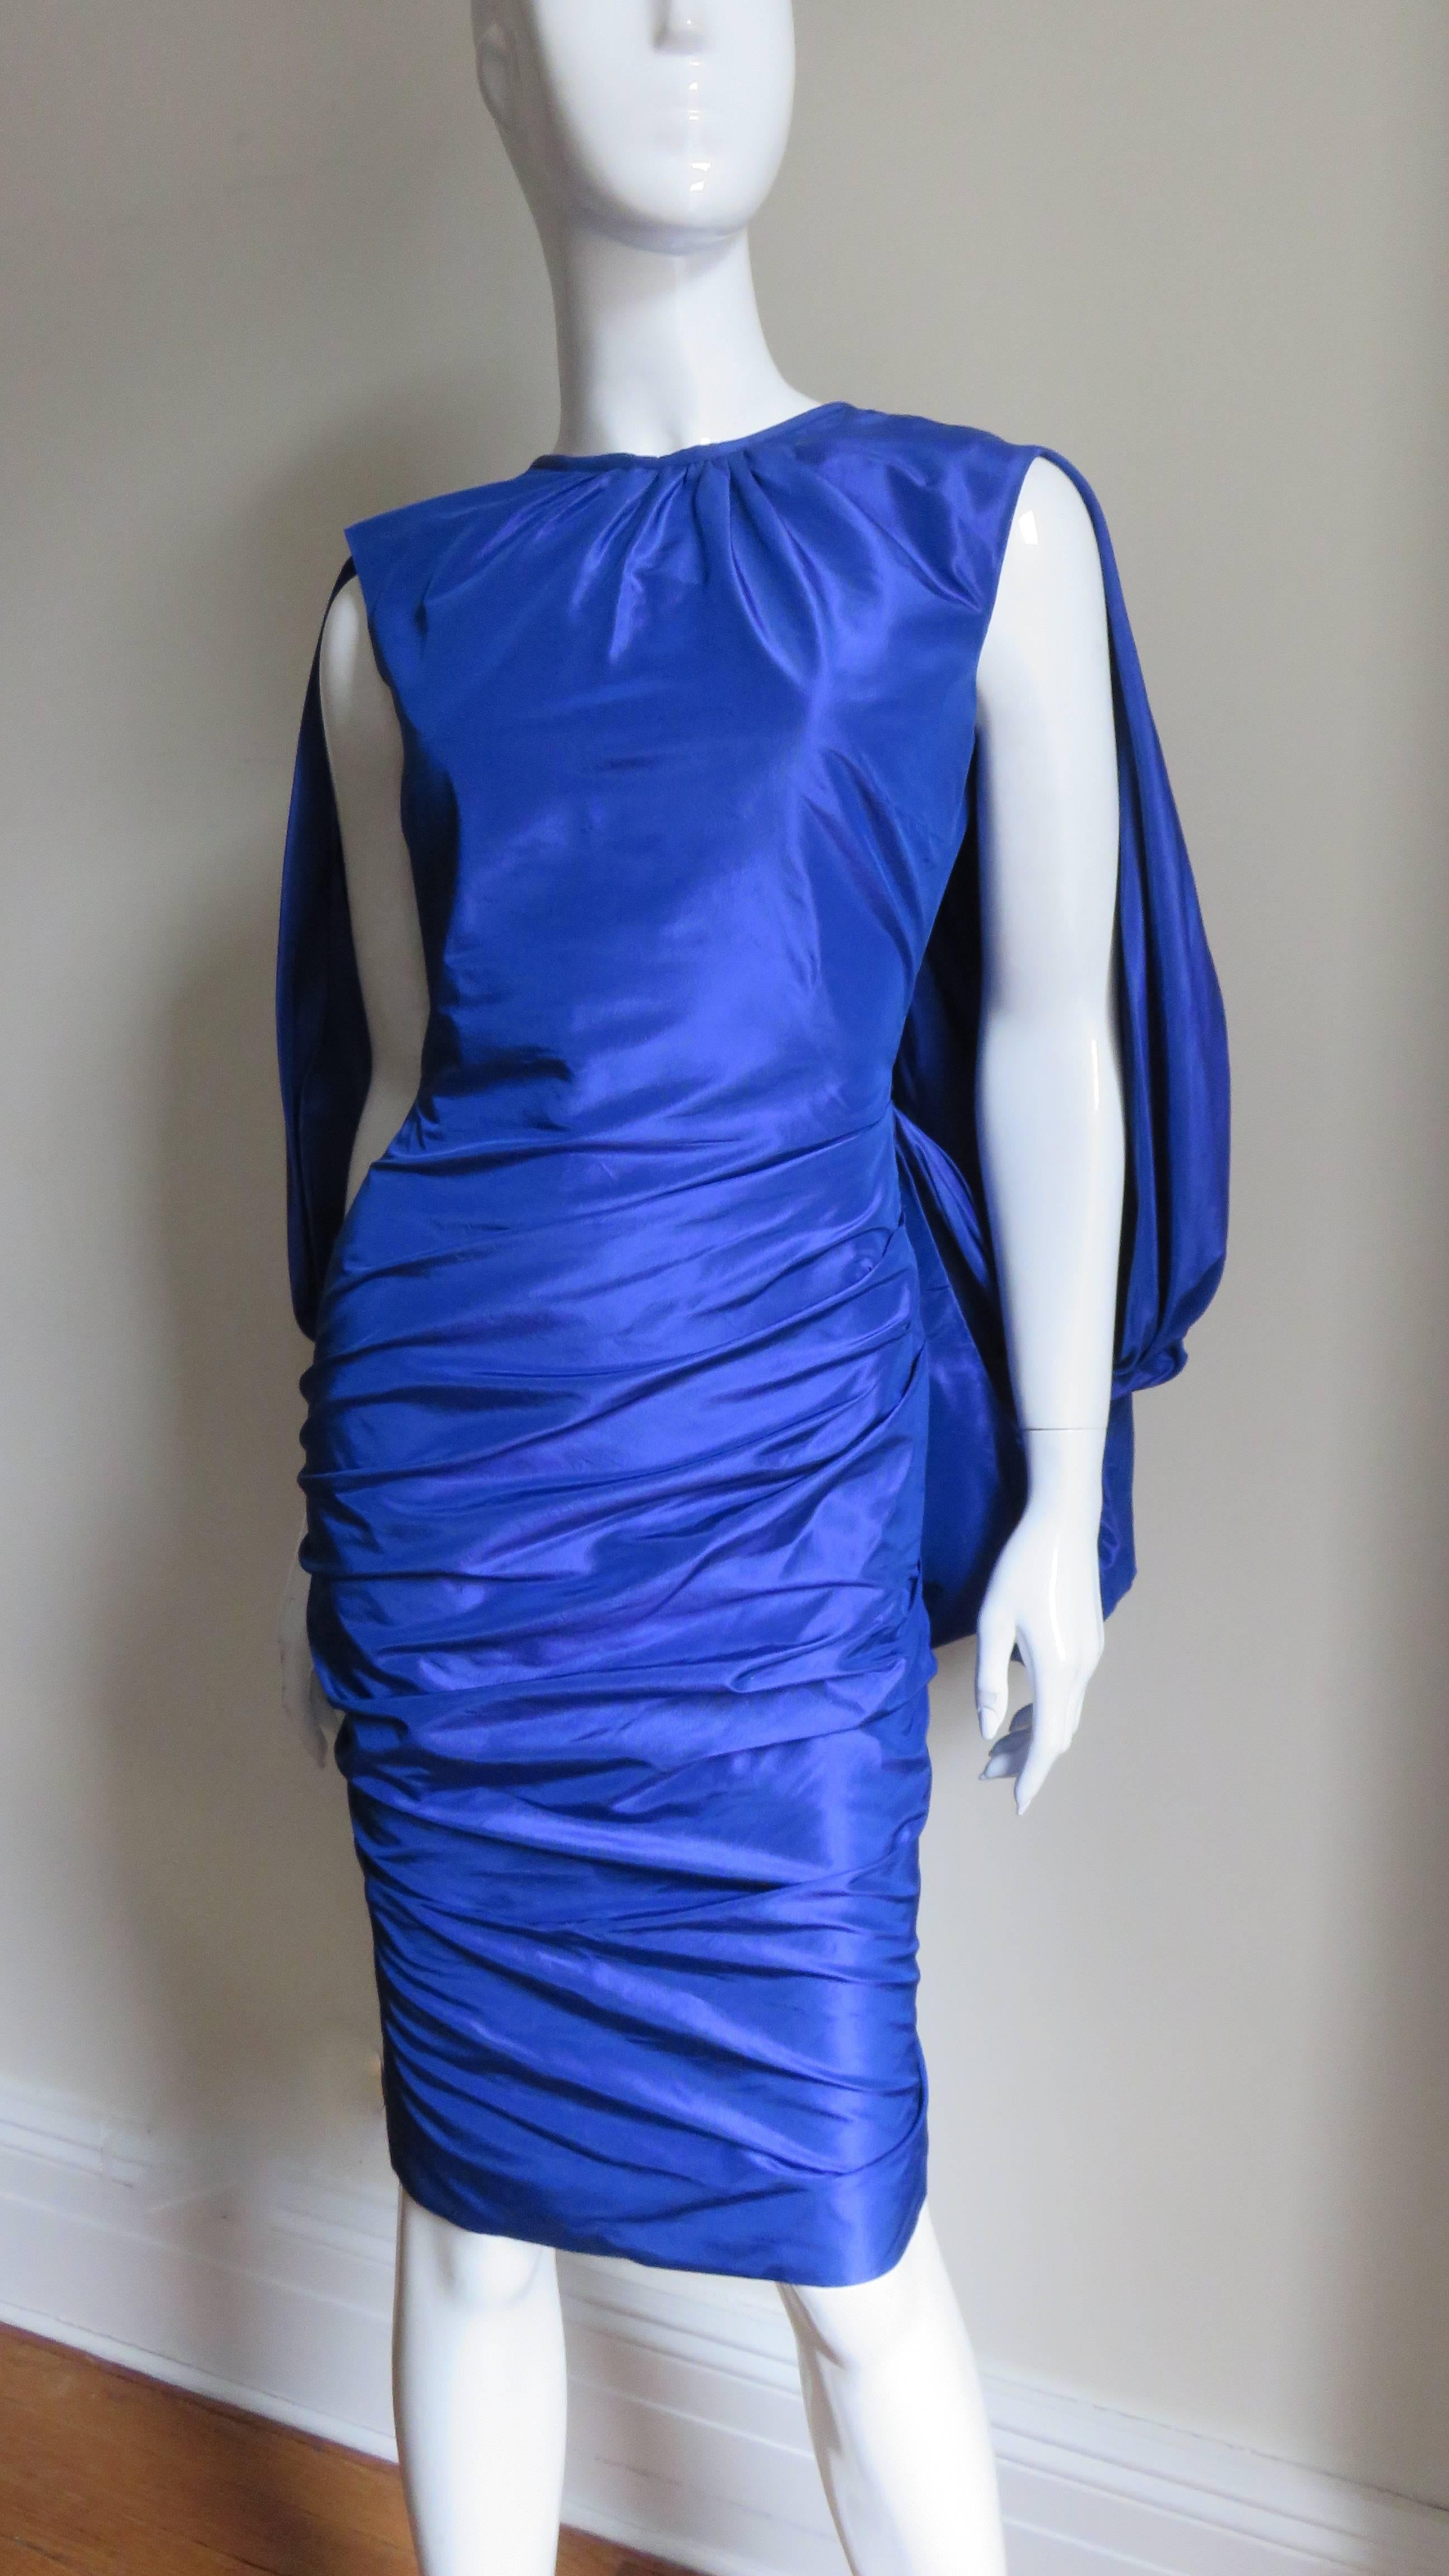 Tom Ford New Drape Back Ruched Dress In Excellent Condition For Sale In Water Mill, NY